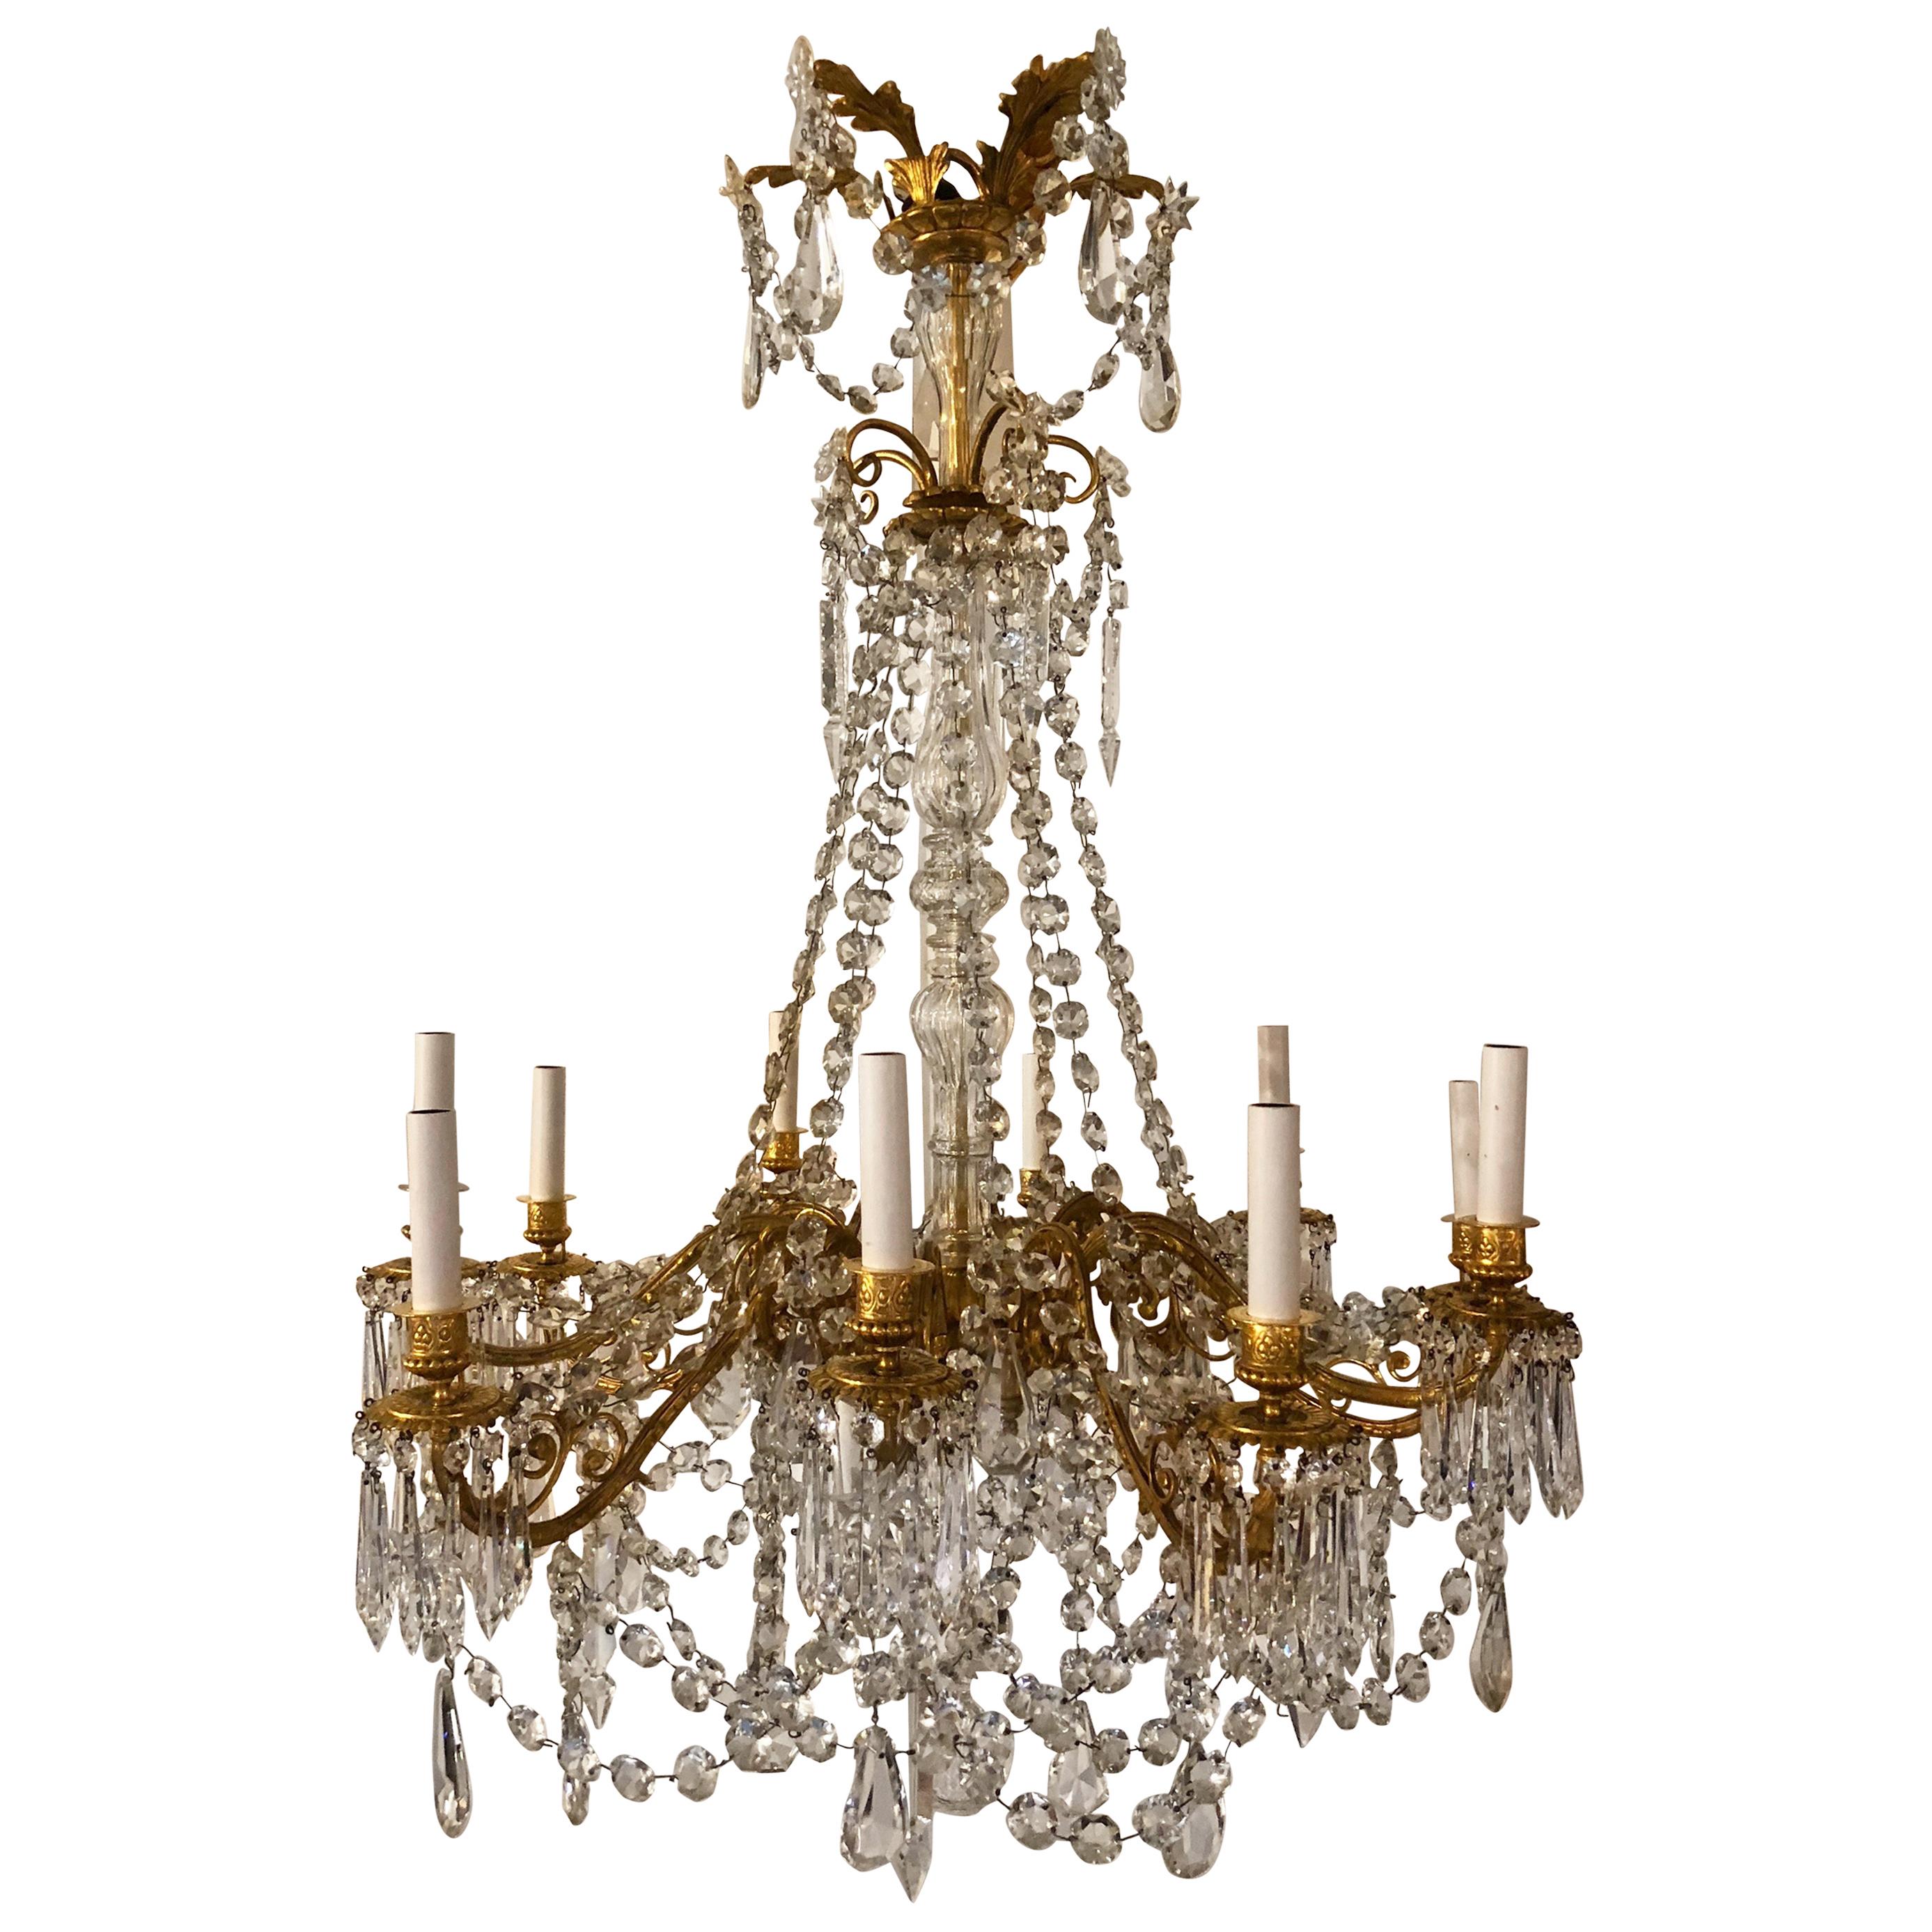 Antique French Bronze Doré and Crystal Chandelier